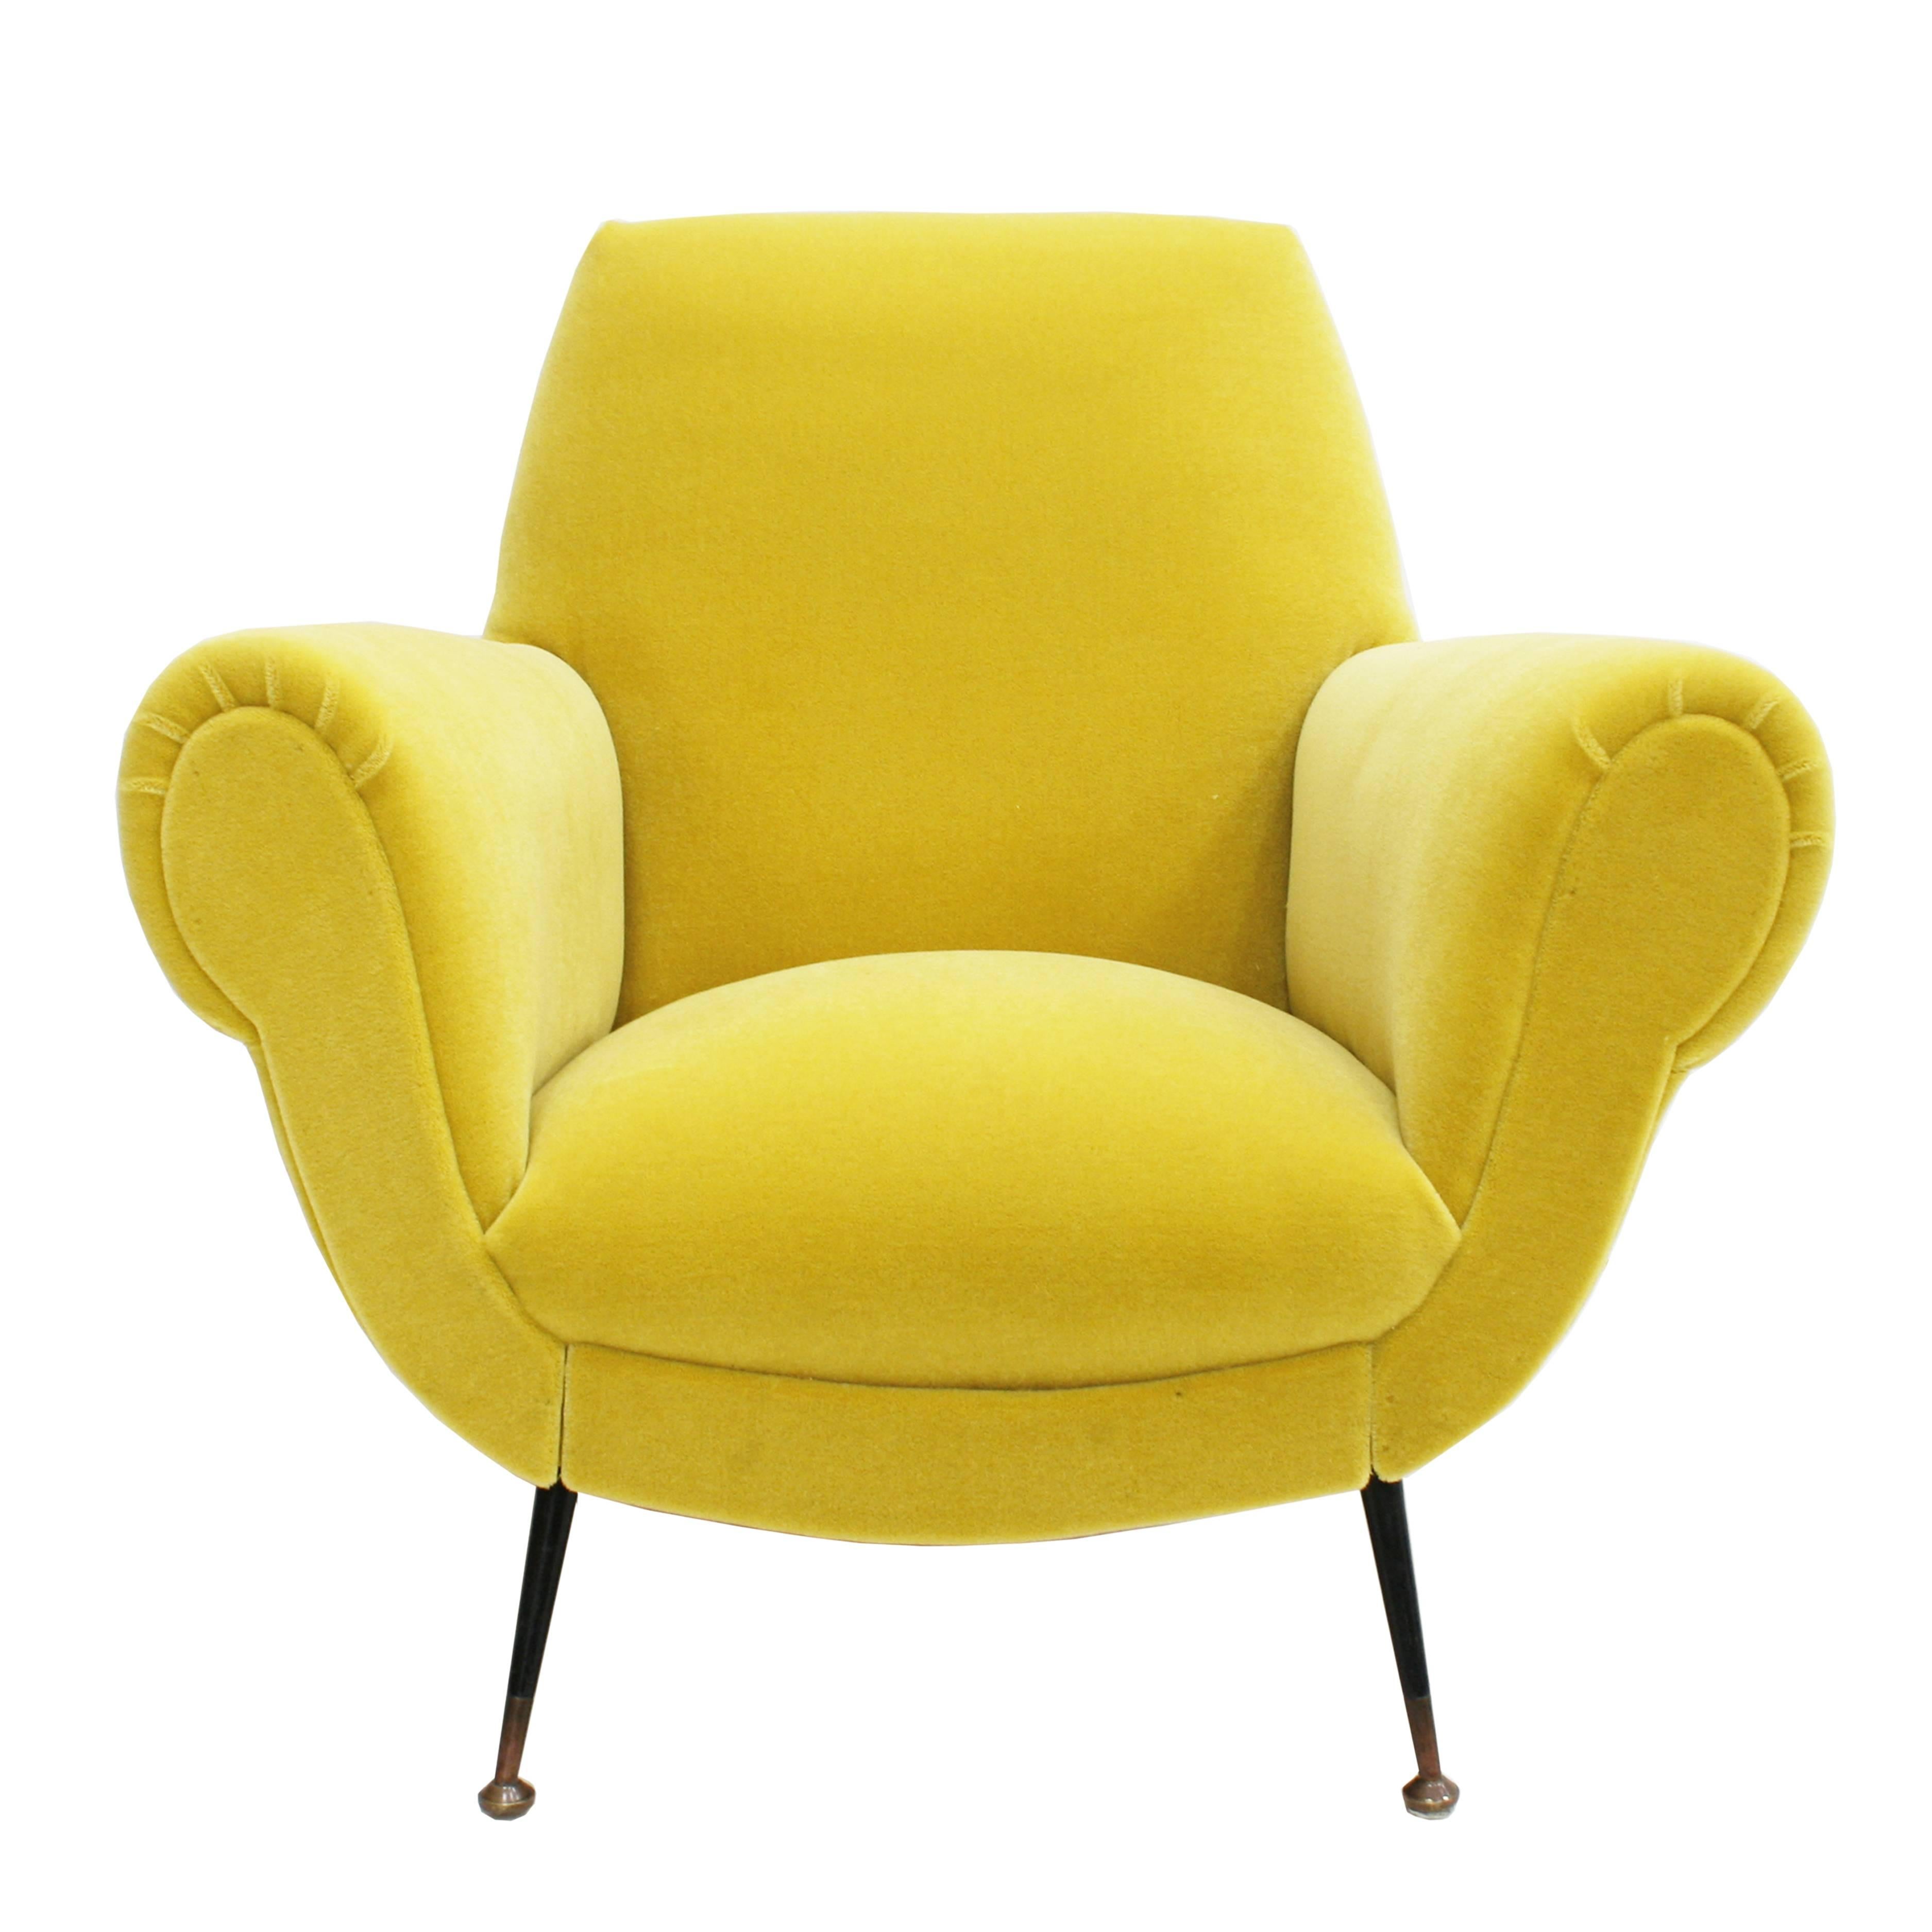 Pair of chairs with solid wood structure with brass legs. Designed by Gigi Radice for Minotti. Upholstered in yellow cotton velvet designed by India Mahdavi for Pierre Frey.